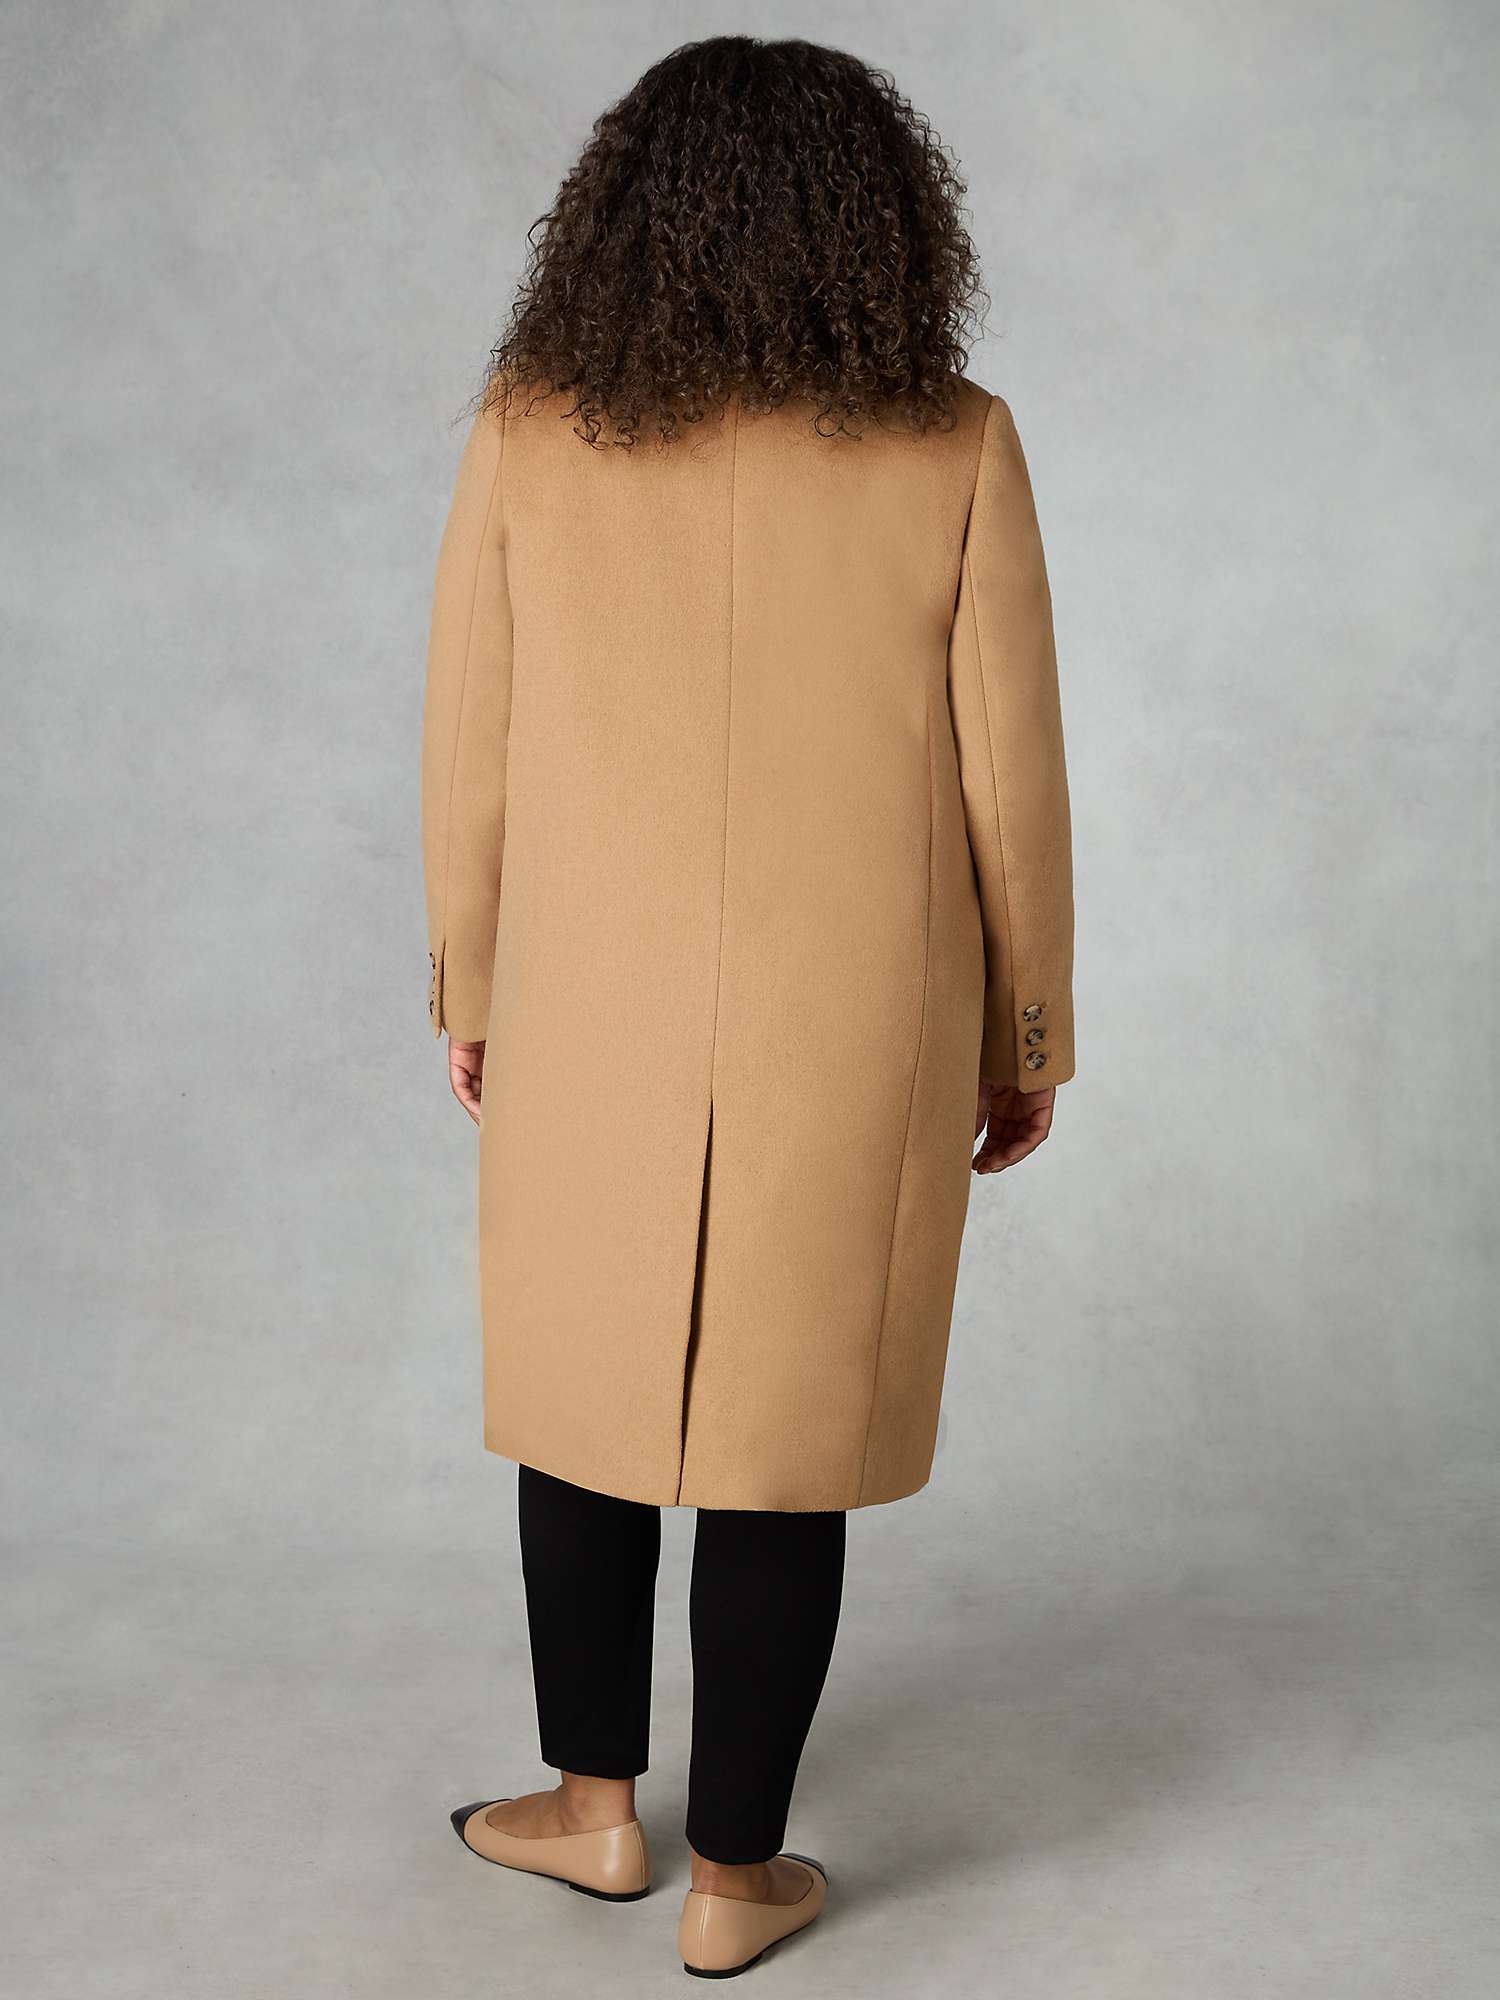 Buy Live Unlimited Curve Wool Blend Long Tailored Coat Online at johnlewis.com